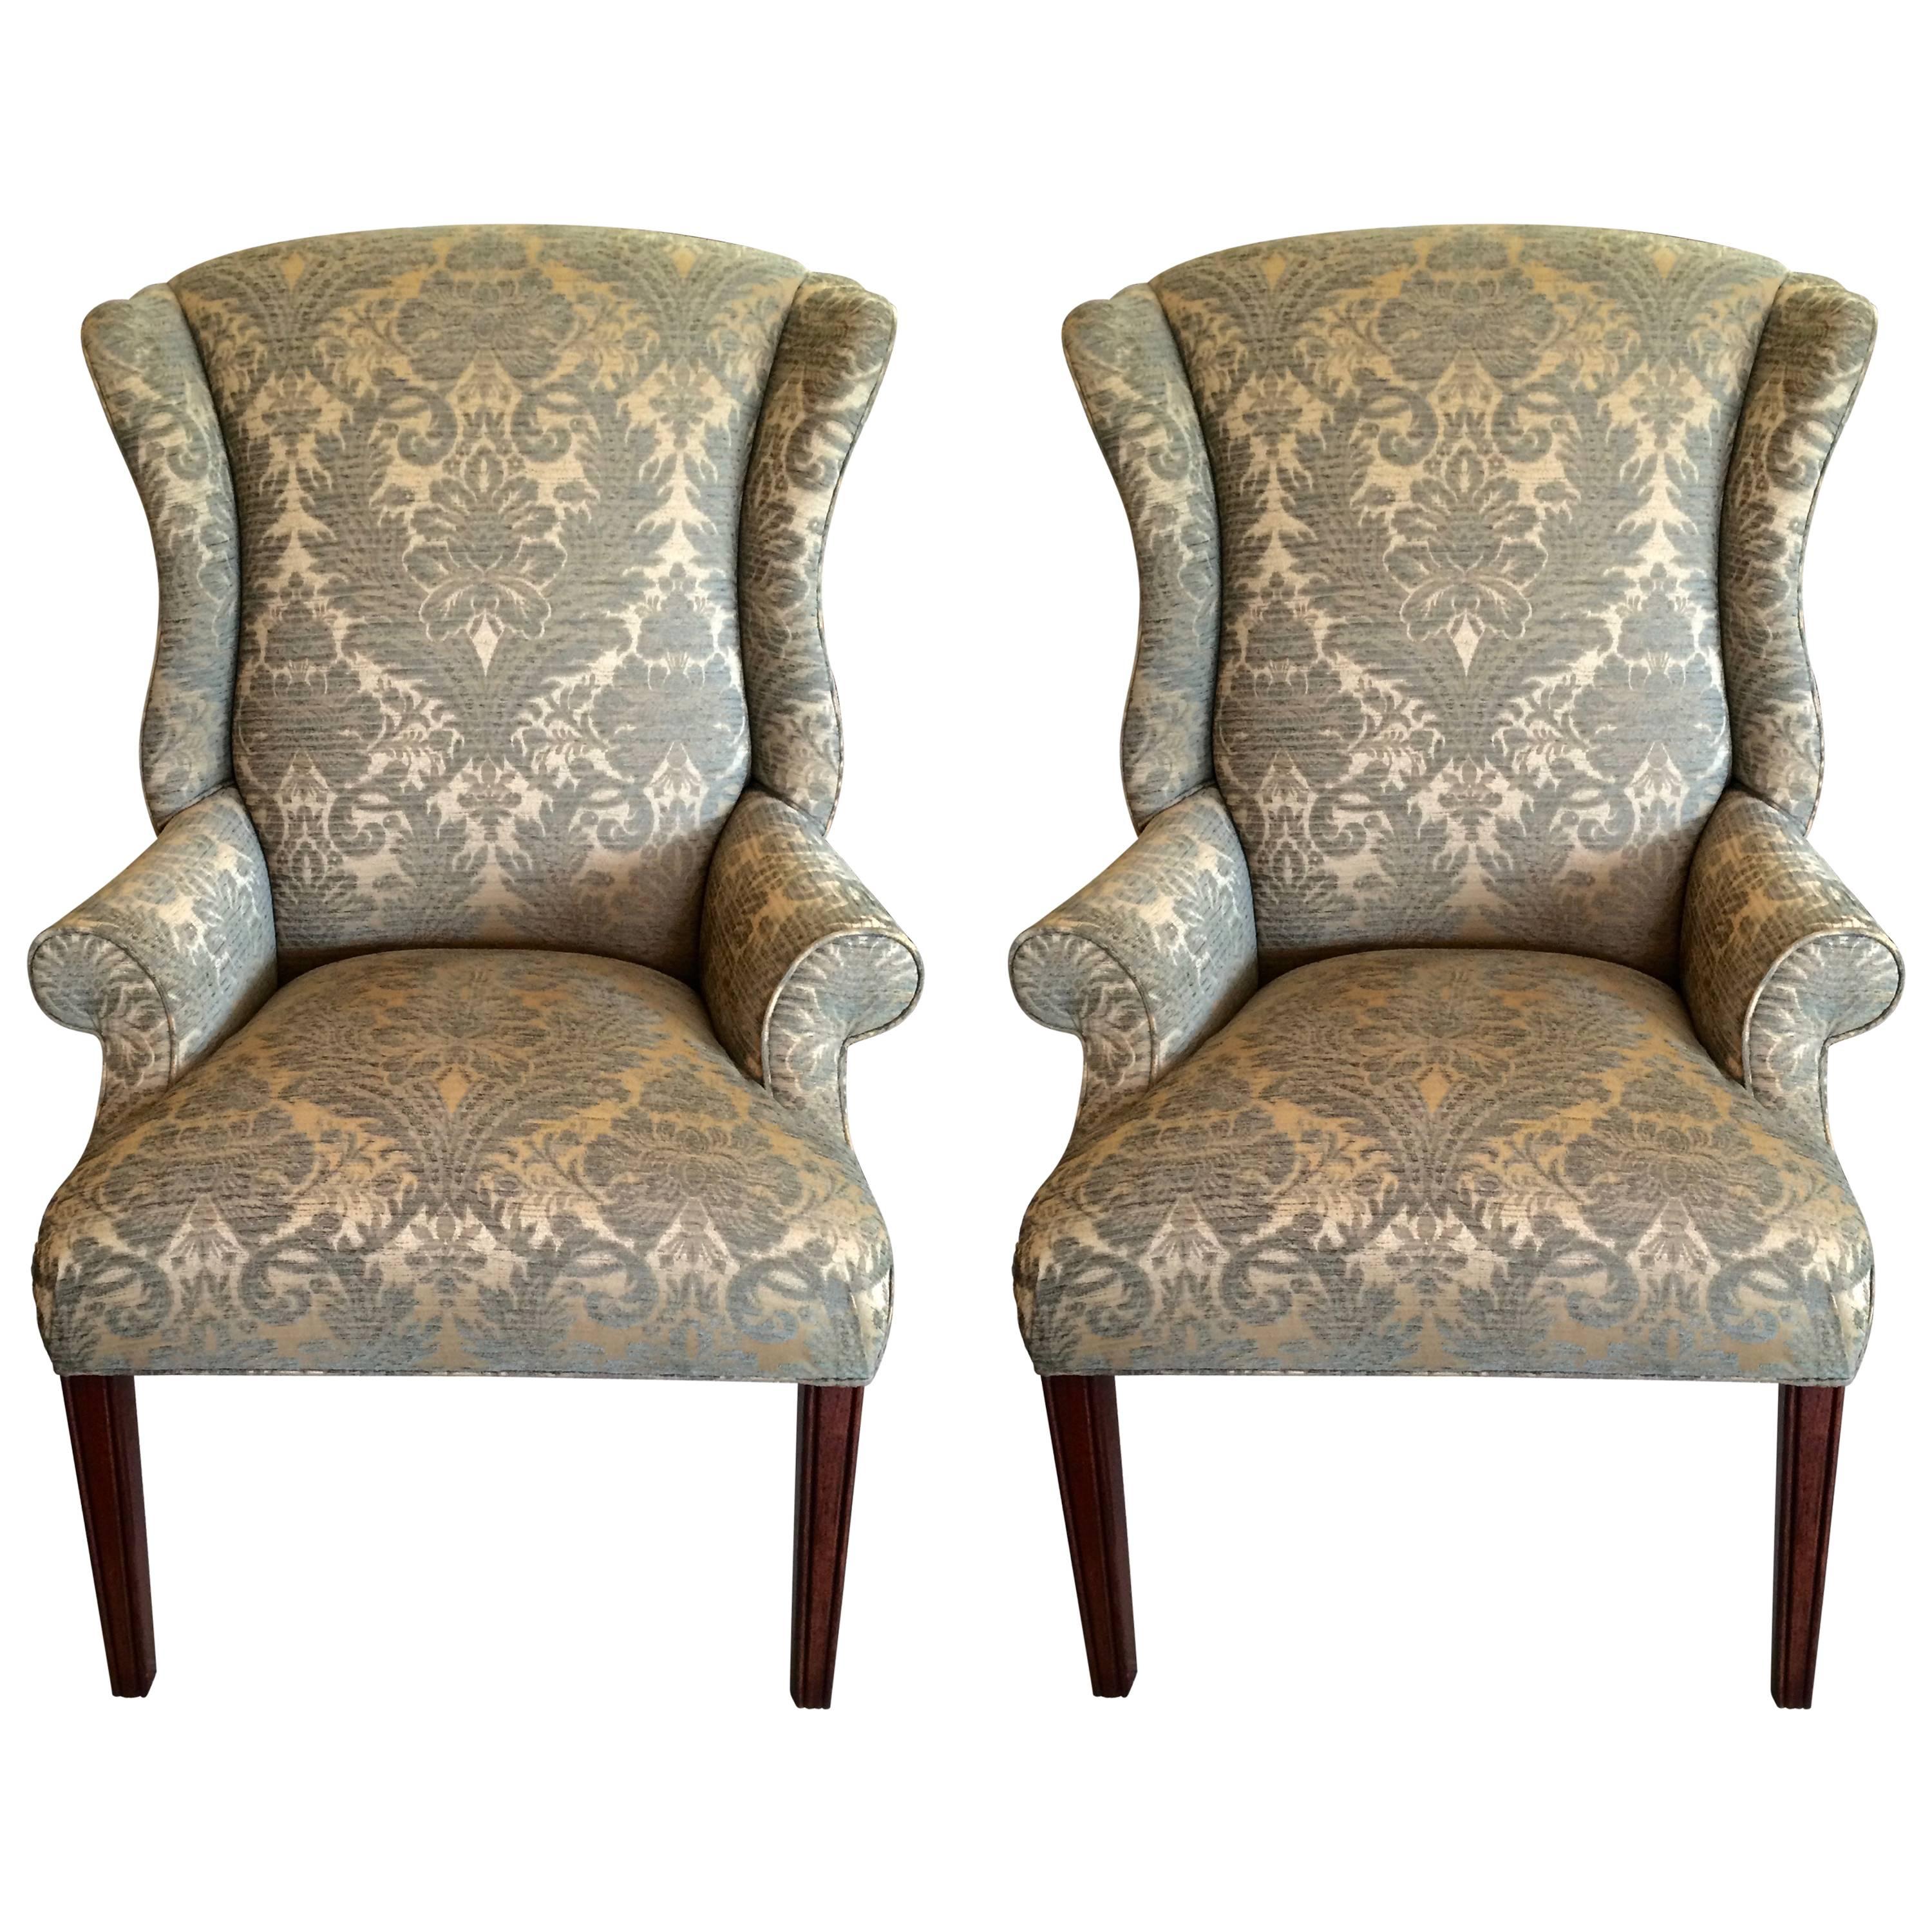 Pair of Regal Federal Style Wing Chairs